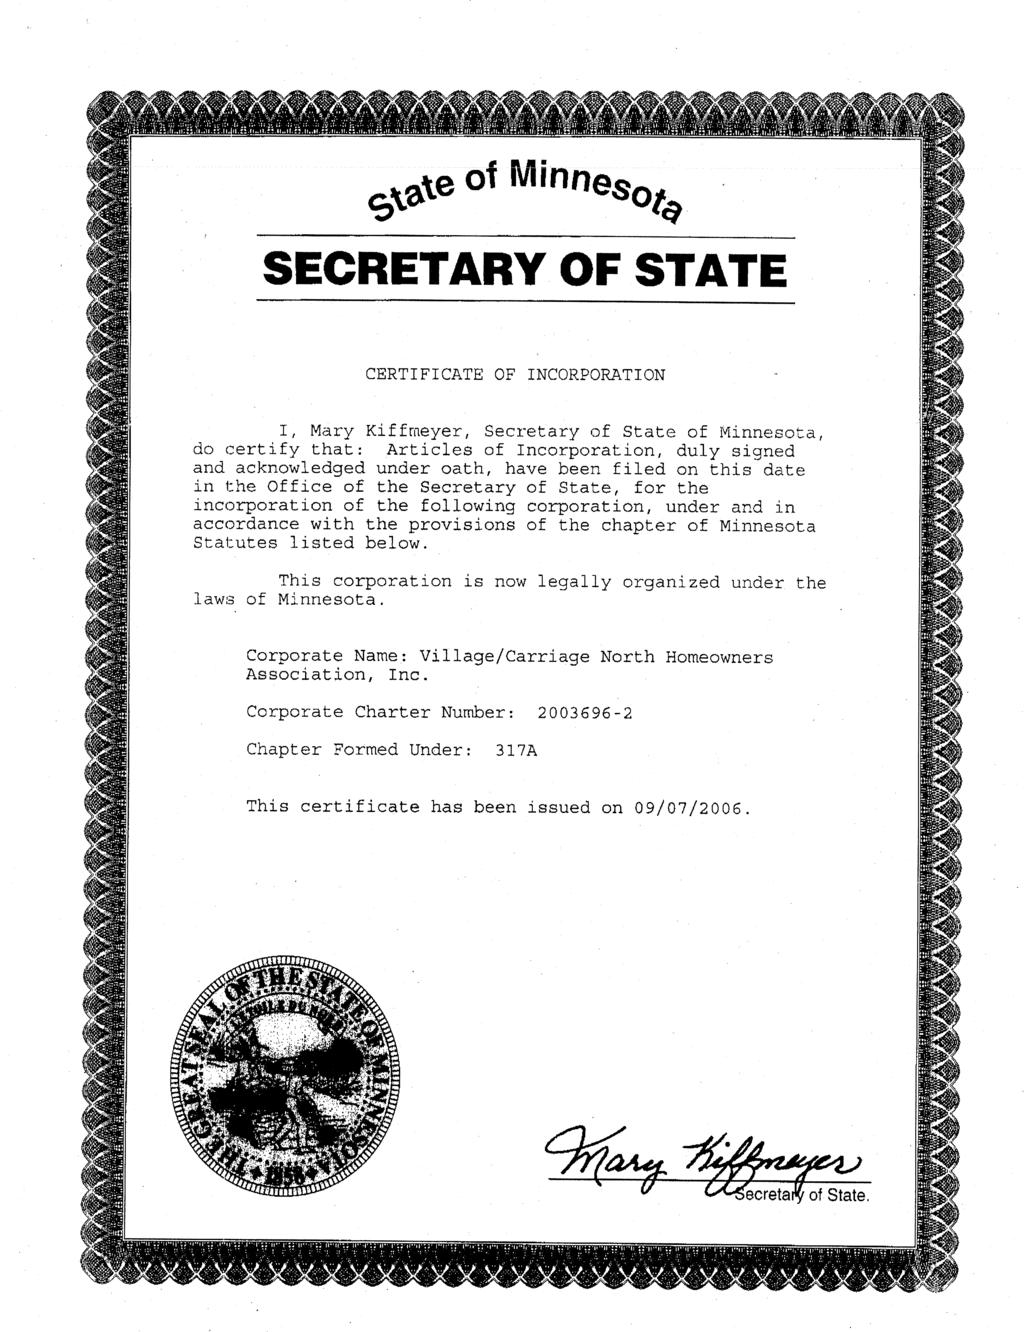 SECRETARY OF STATE CERTIFICATE OF INCORPORATION I, Mary Kiffmeyer, Secretary of State of Minnesota, do certify that: Articles of Incorporation, duly signed and acknowledged under oath, have been